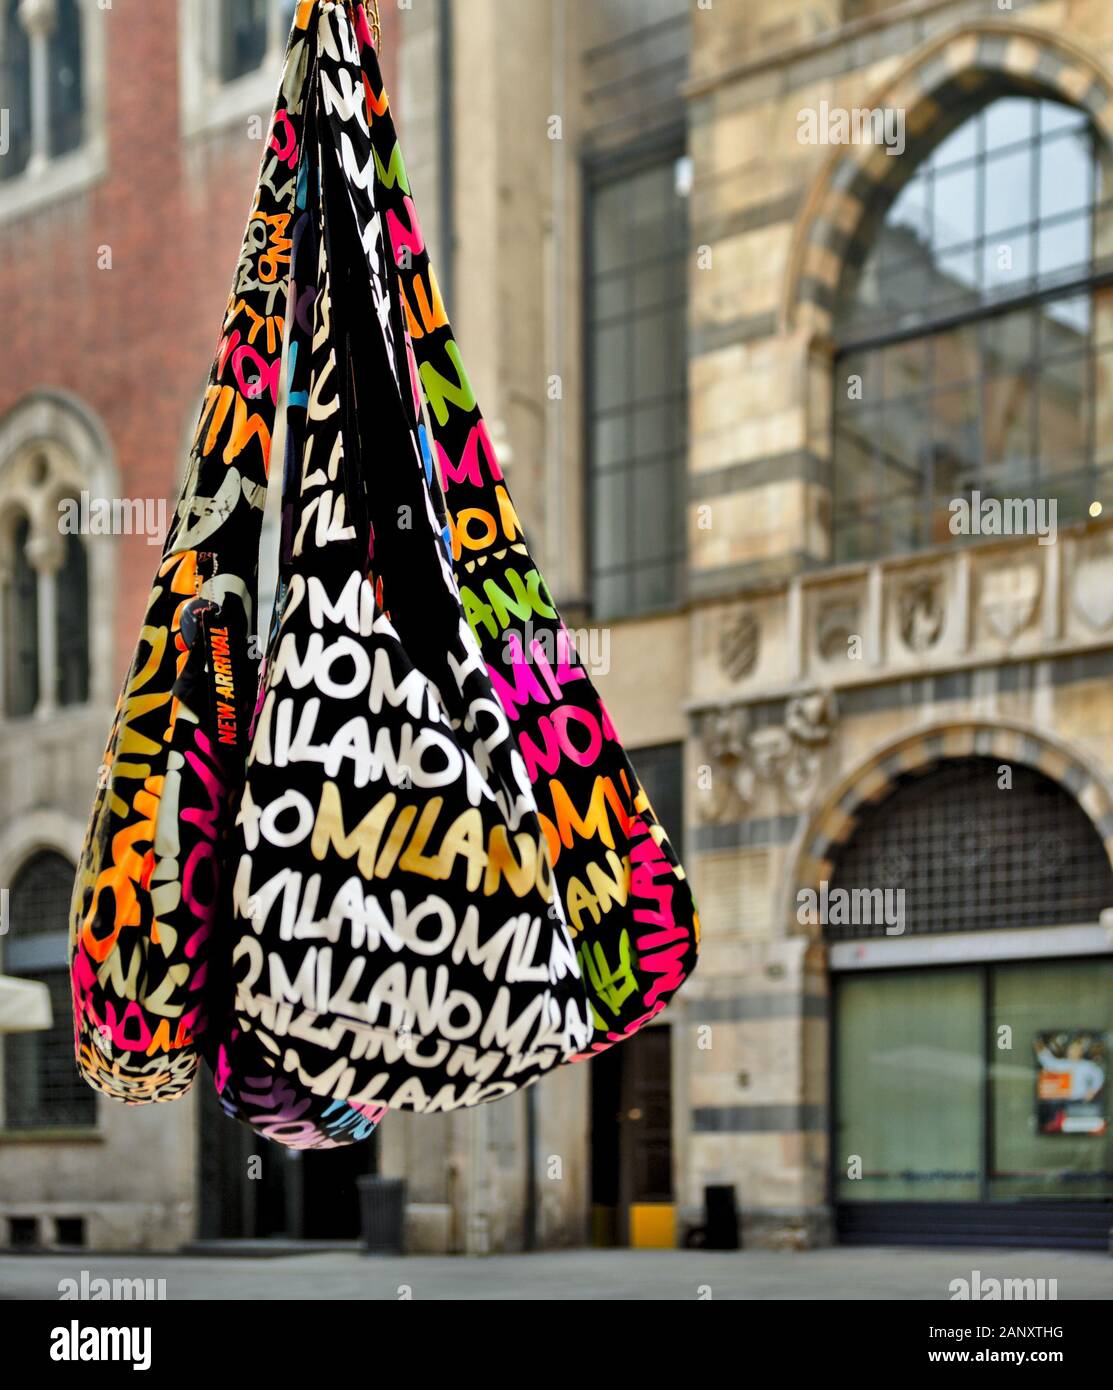 Bags for sale at a kiosk in the ancient Piazza dei Mercanti (Merchants Square) in Milan, Italy, 2015 Stock Photo